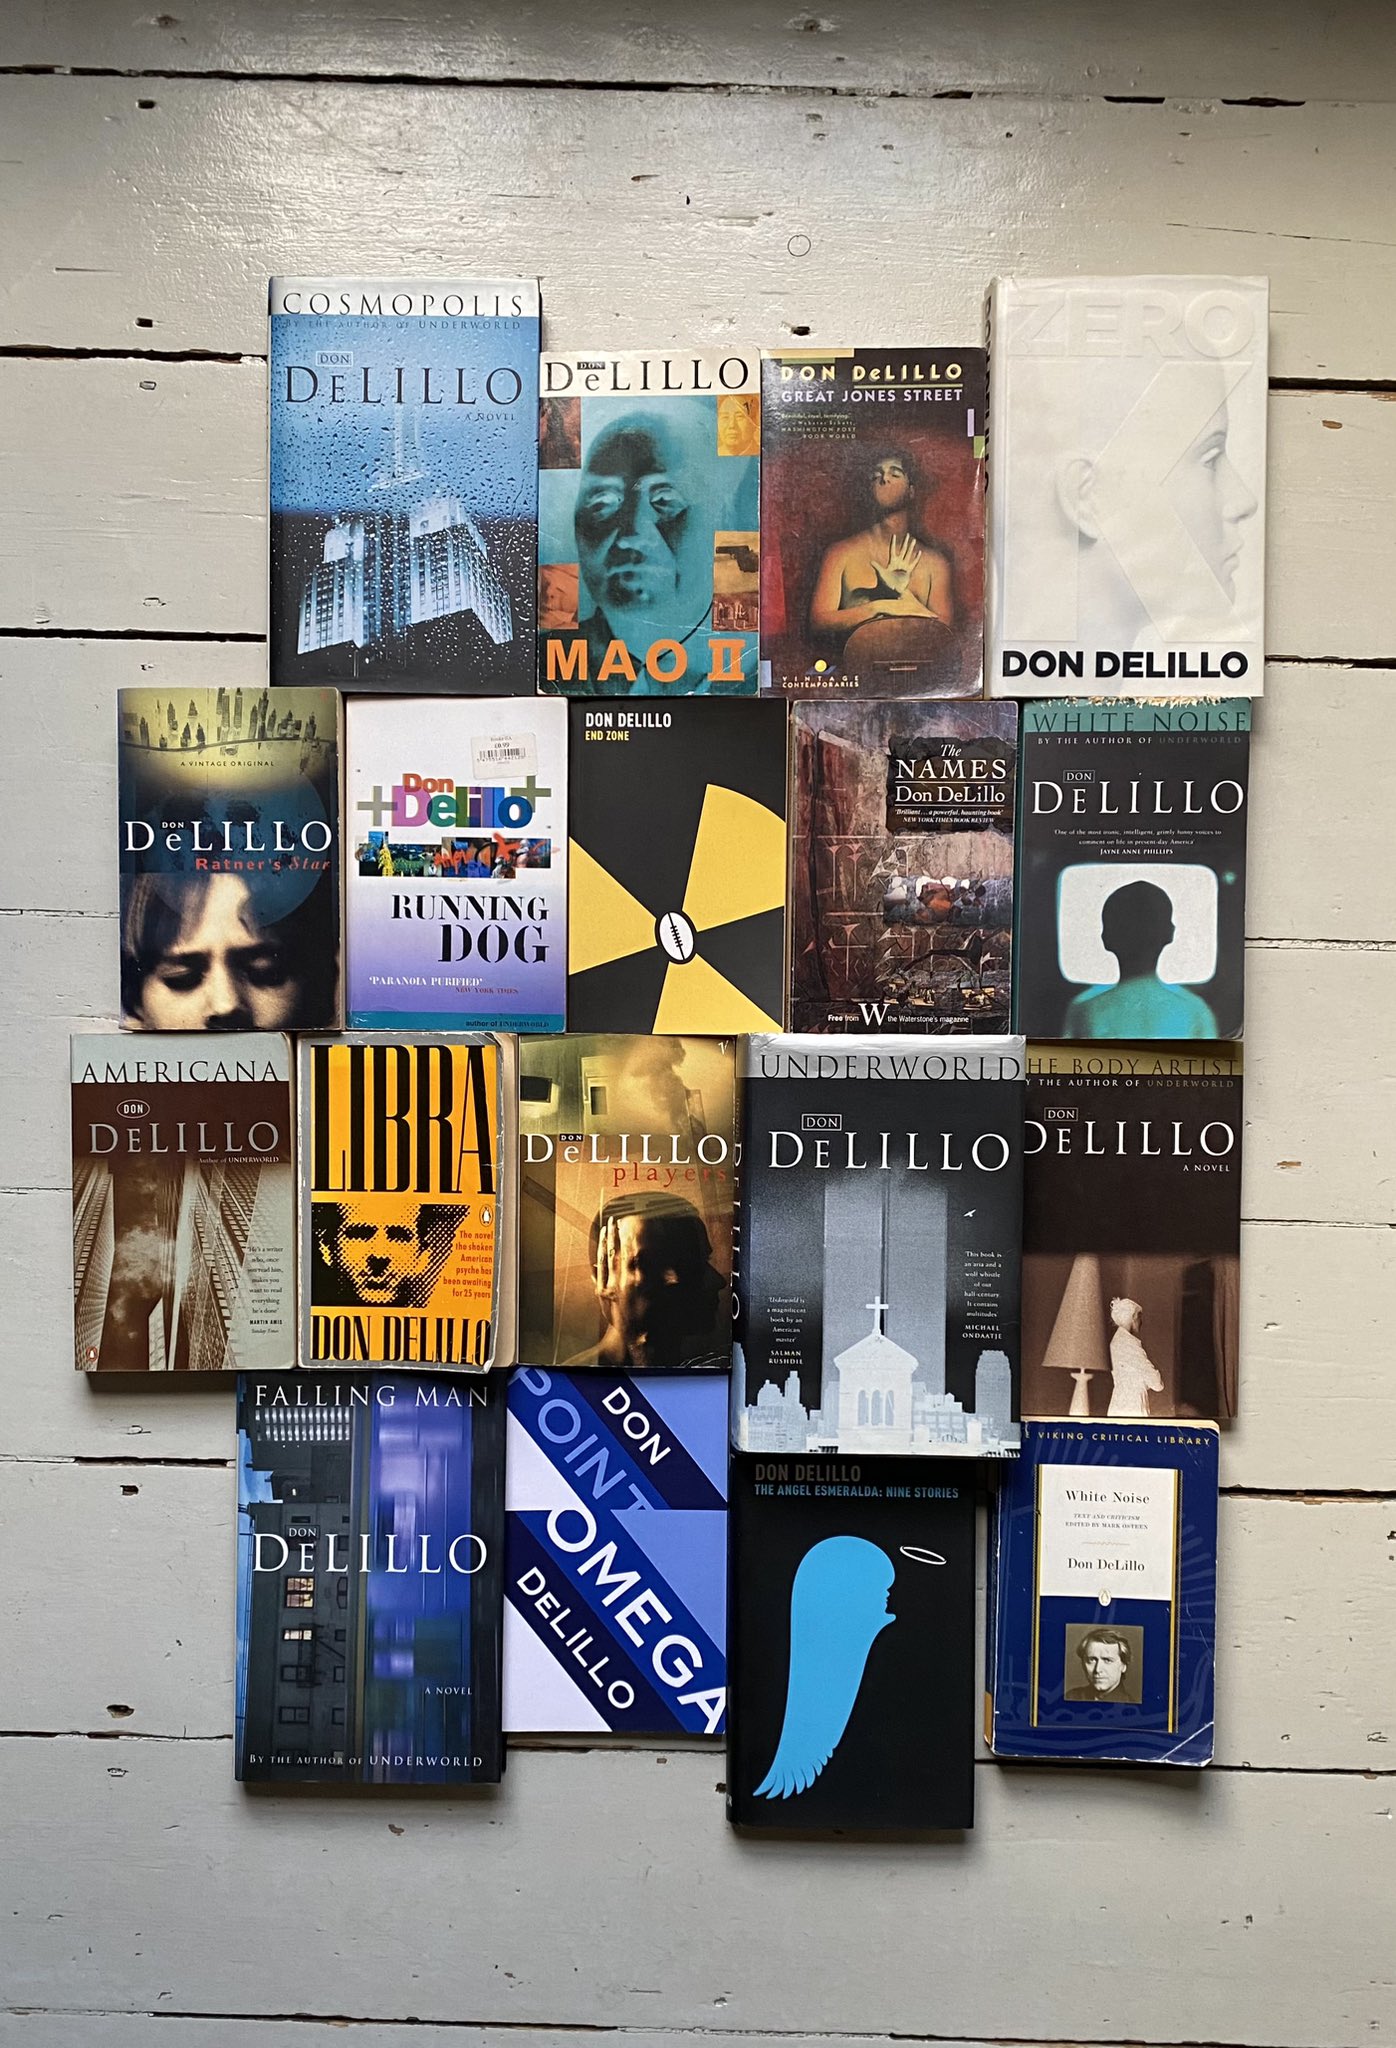 Happy 86th birthday Don DeLillo! Thanks for 18 guides to the world inside the world. 